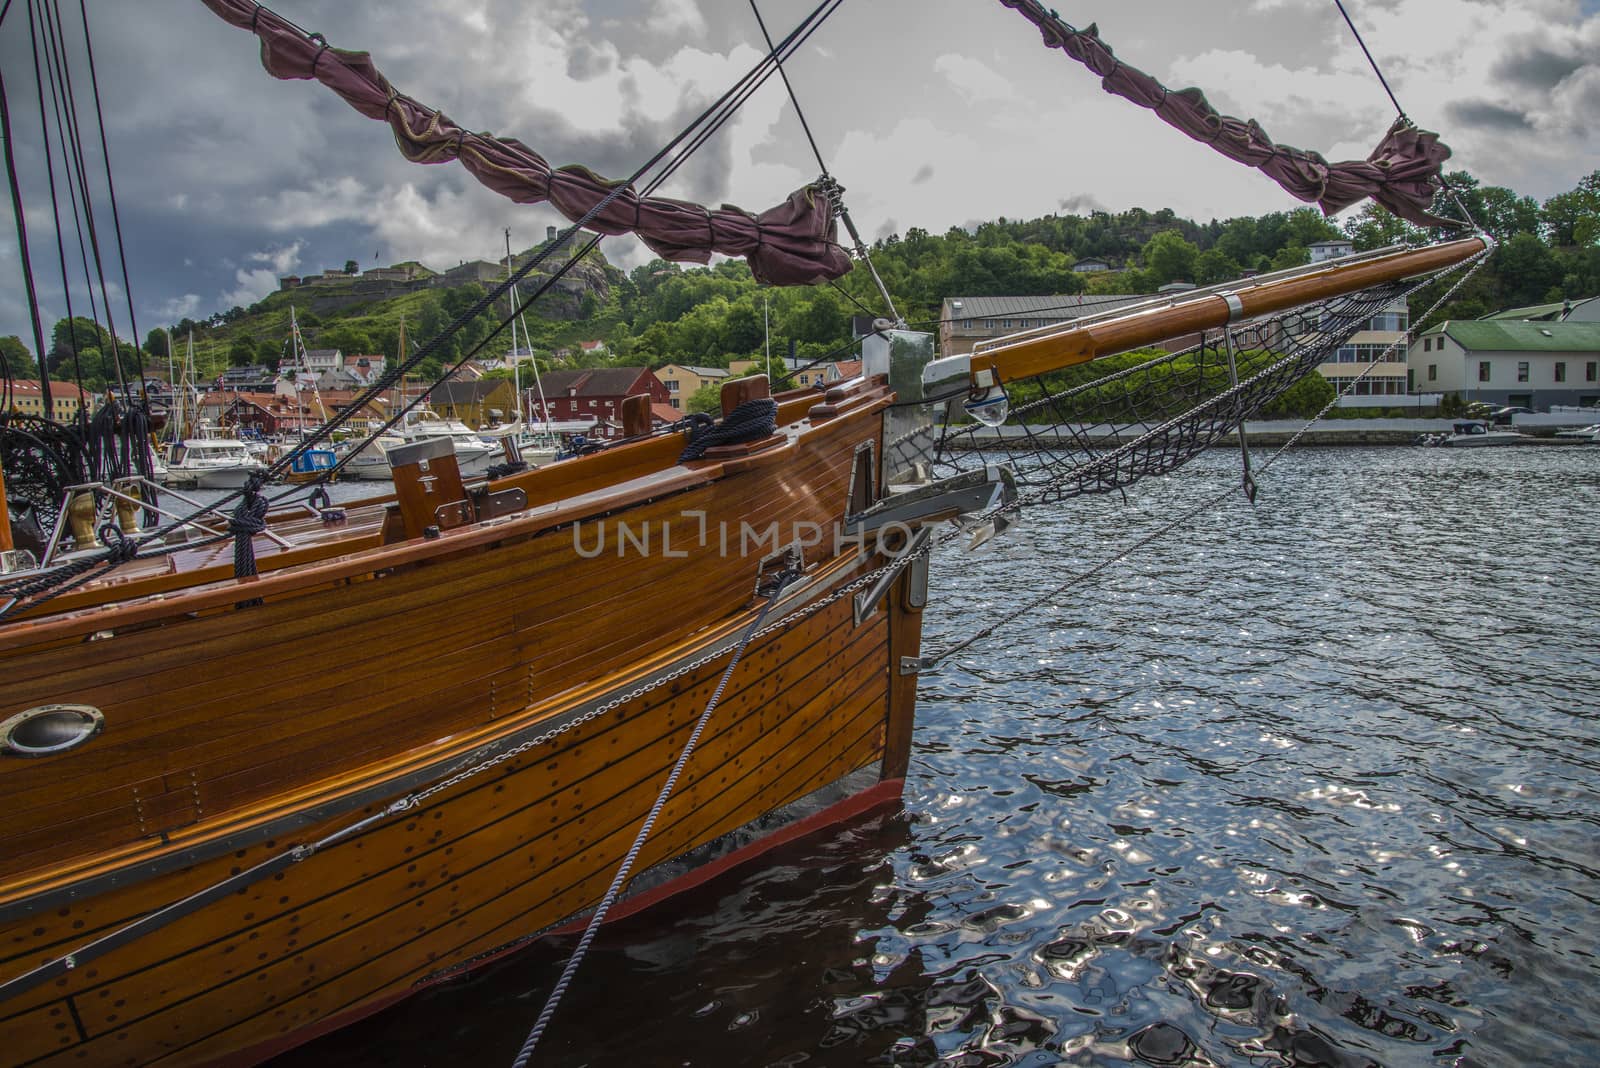 Exhibition of boats in the port of Halden, photo 13 by steirus